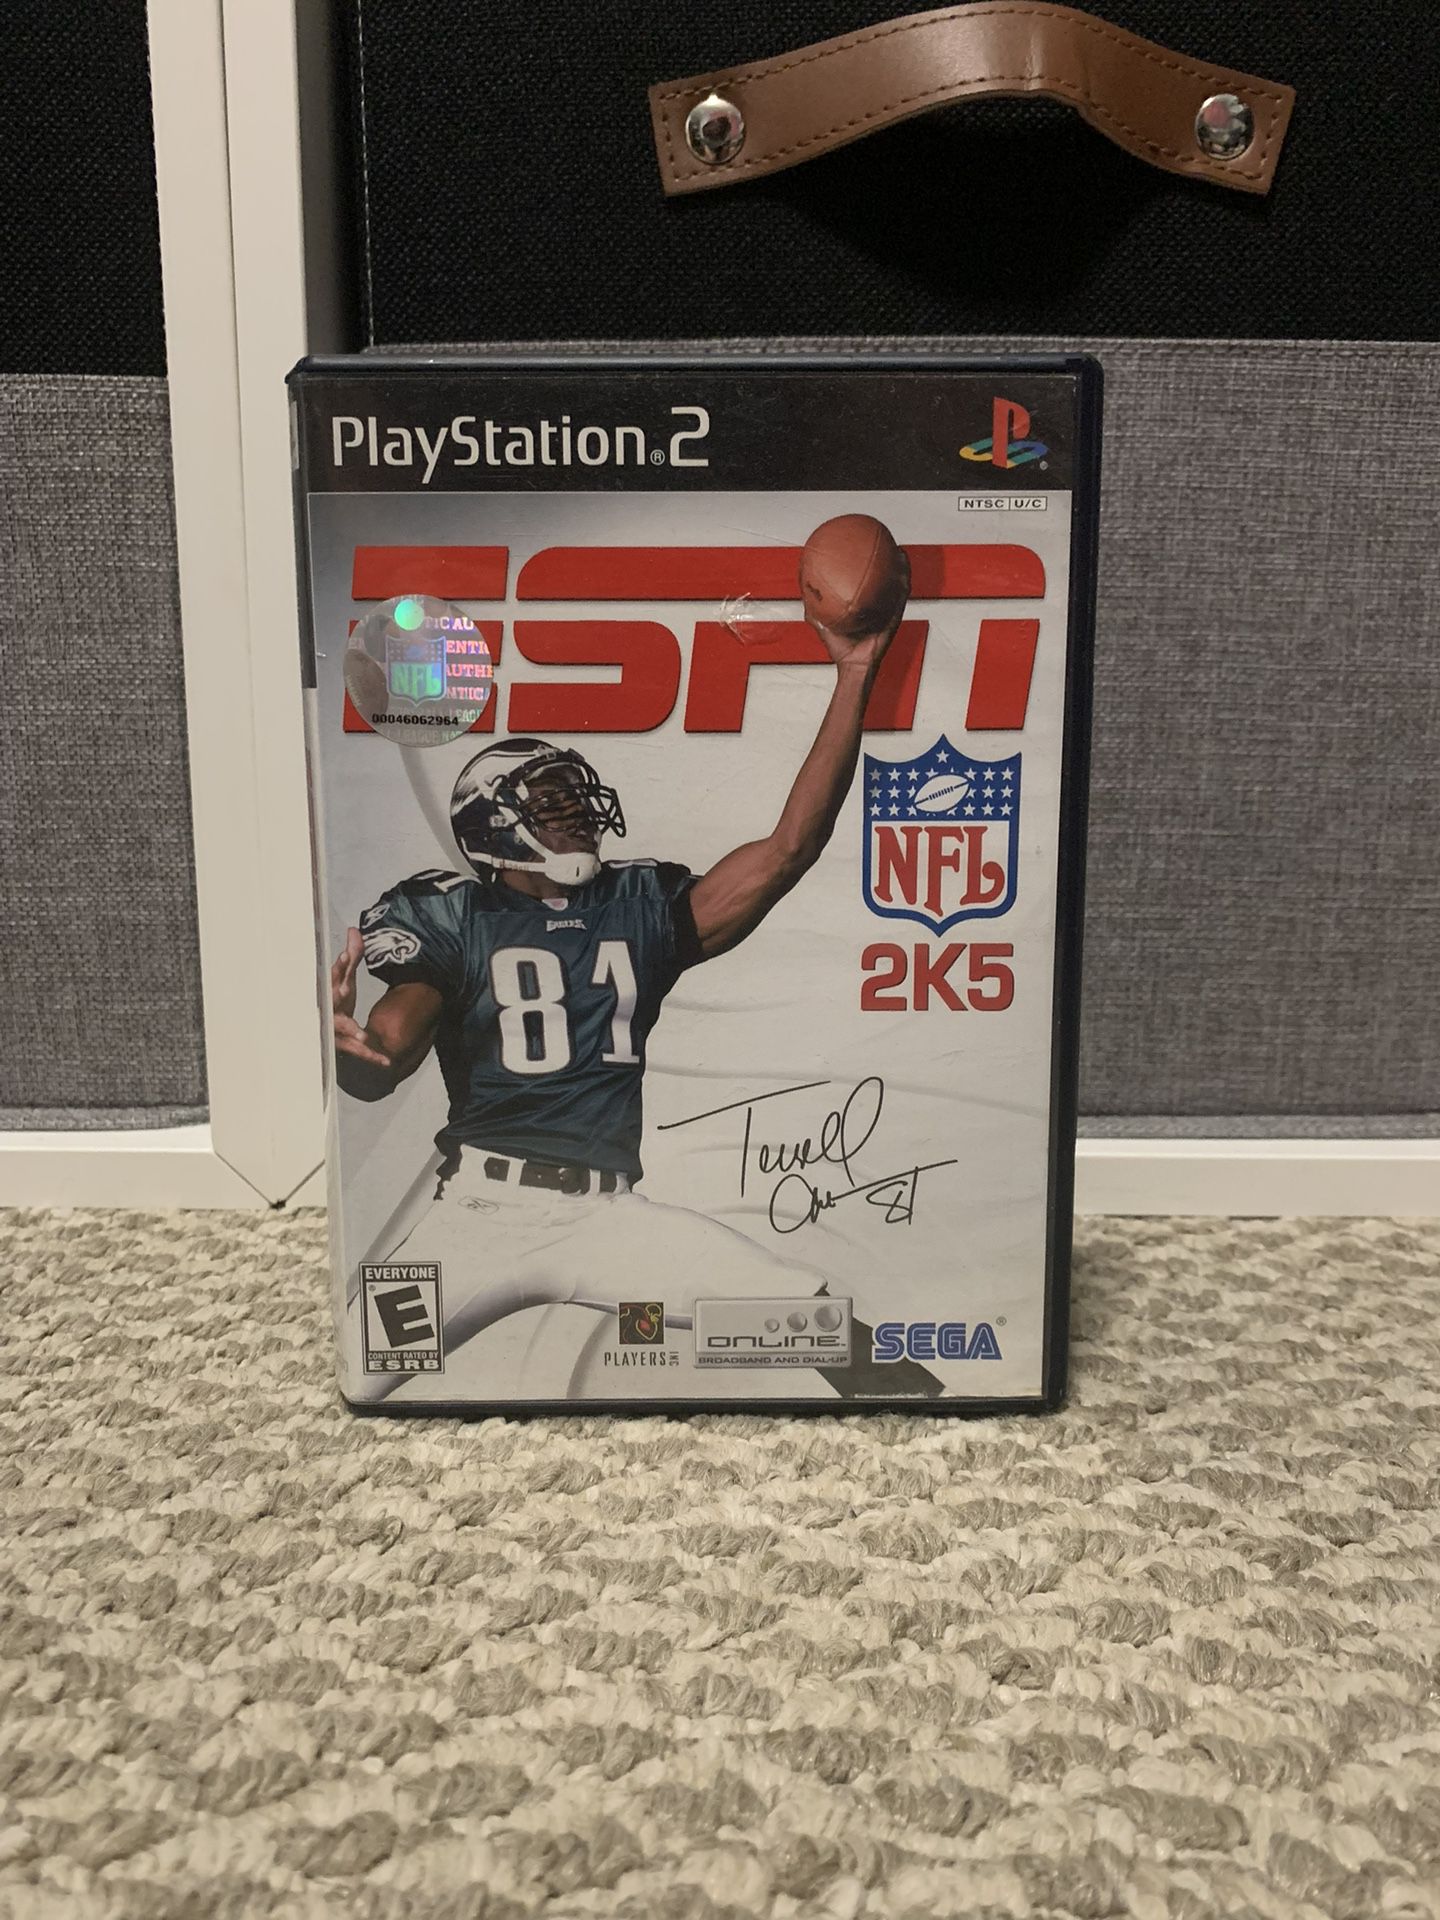 Tested CIB ESPN NFL 2K5 for Ps2